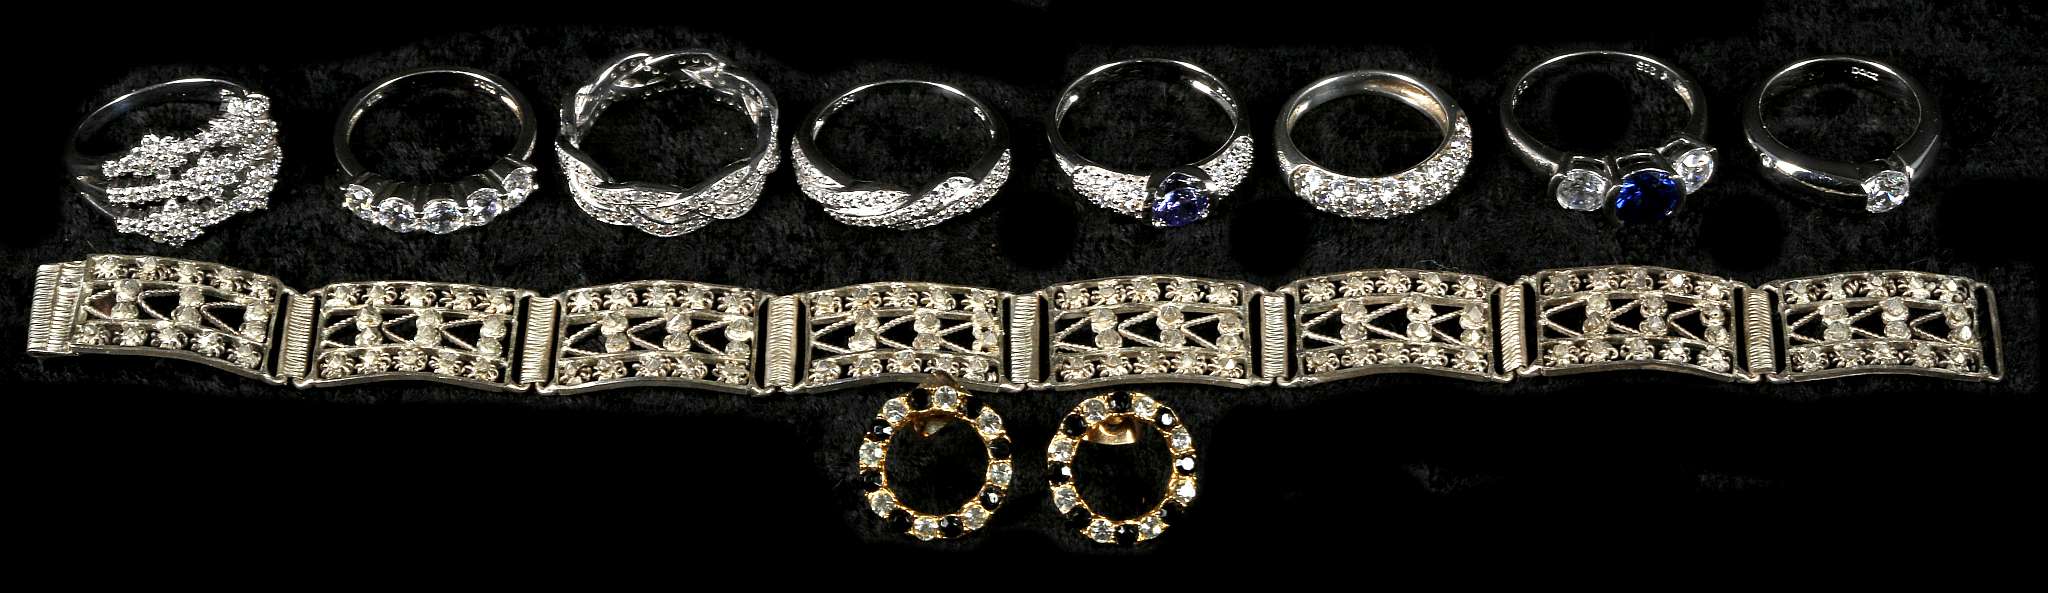 A collection of 8 .925 silver rings set with cubic